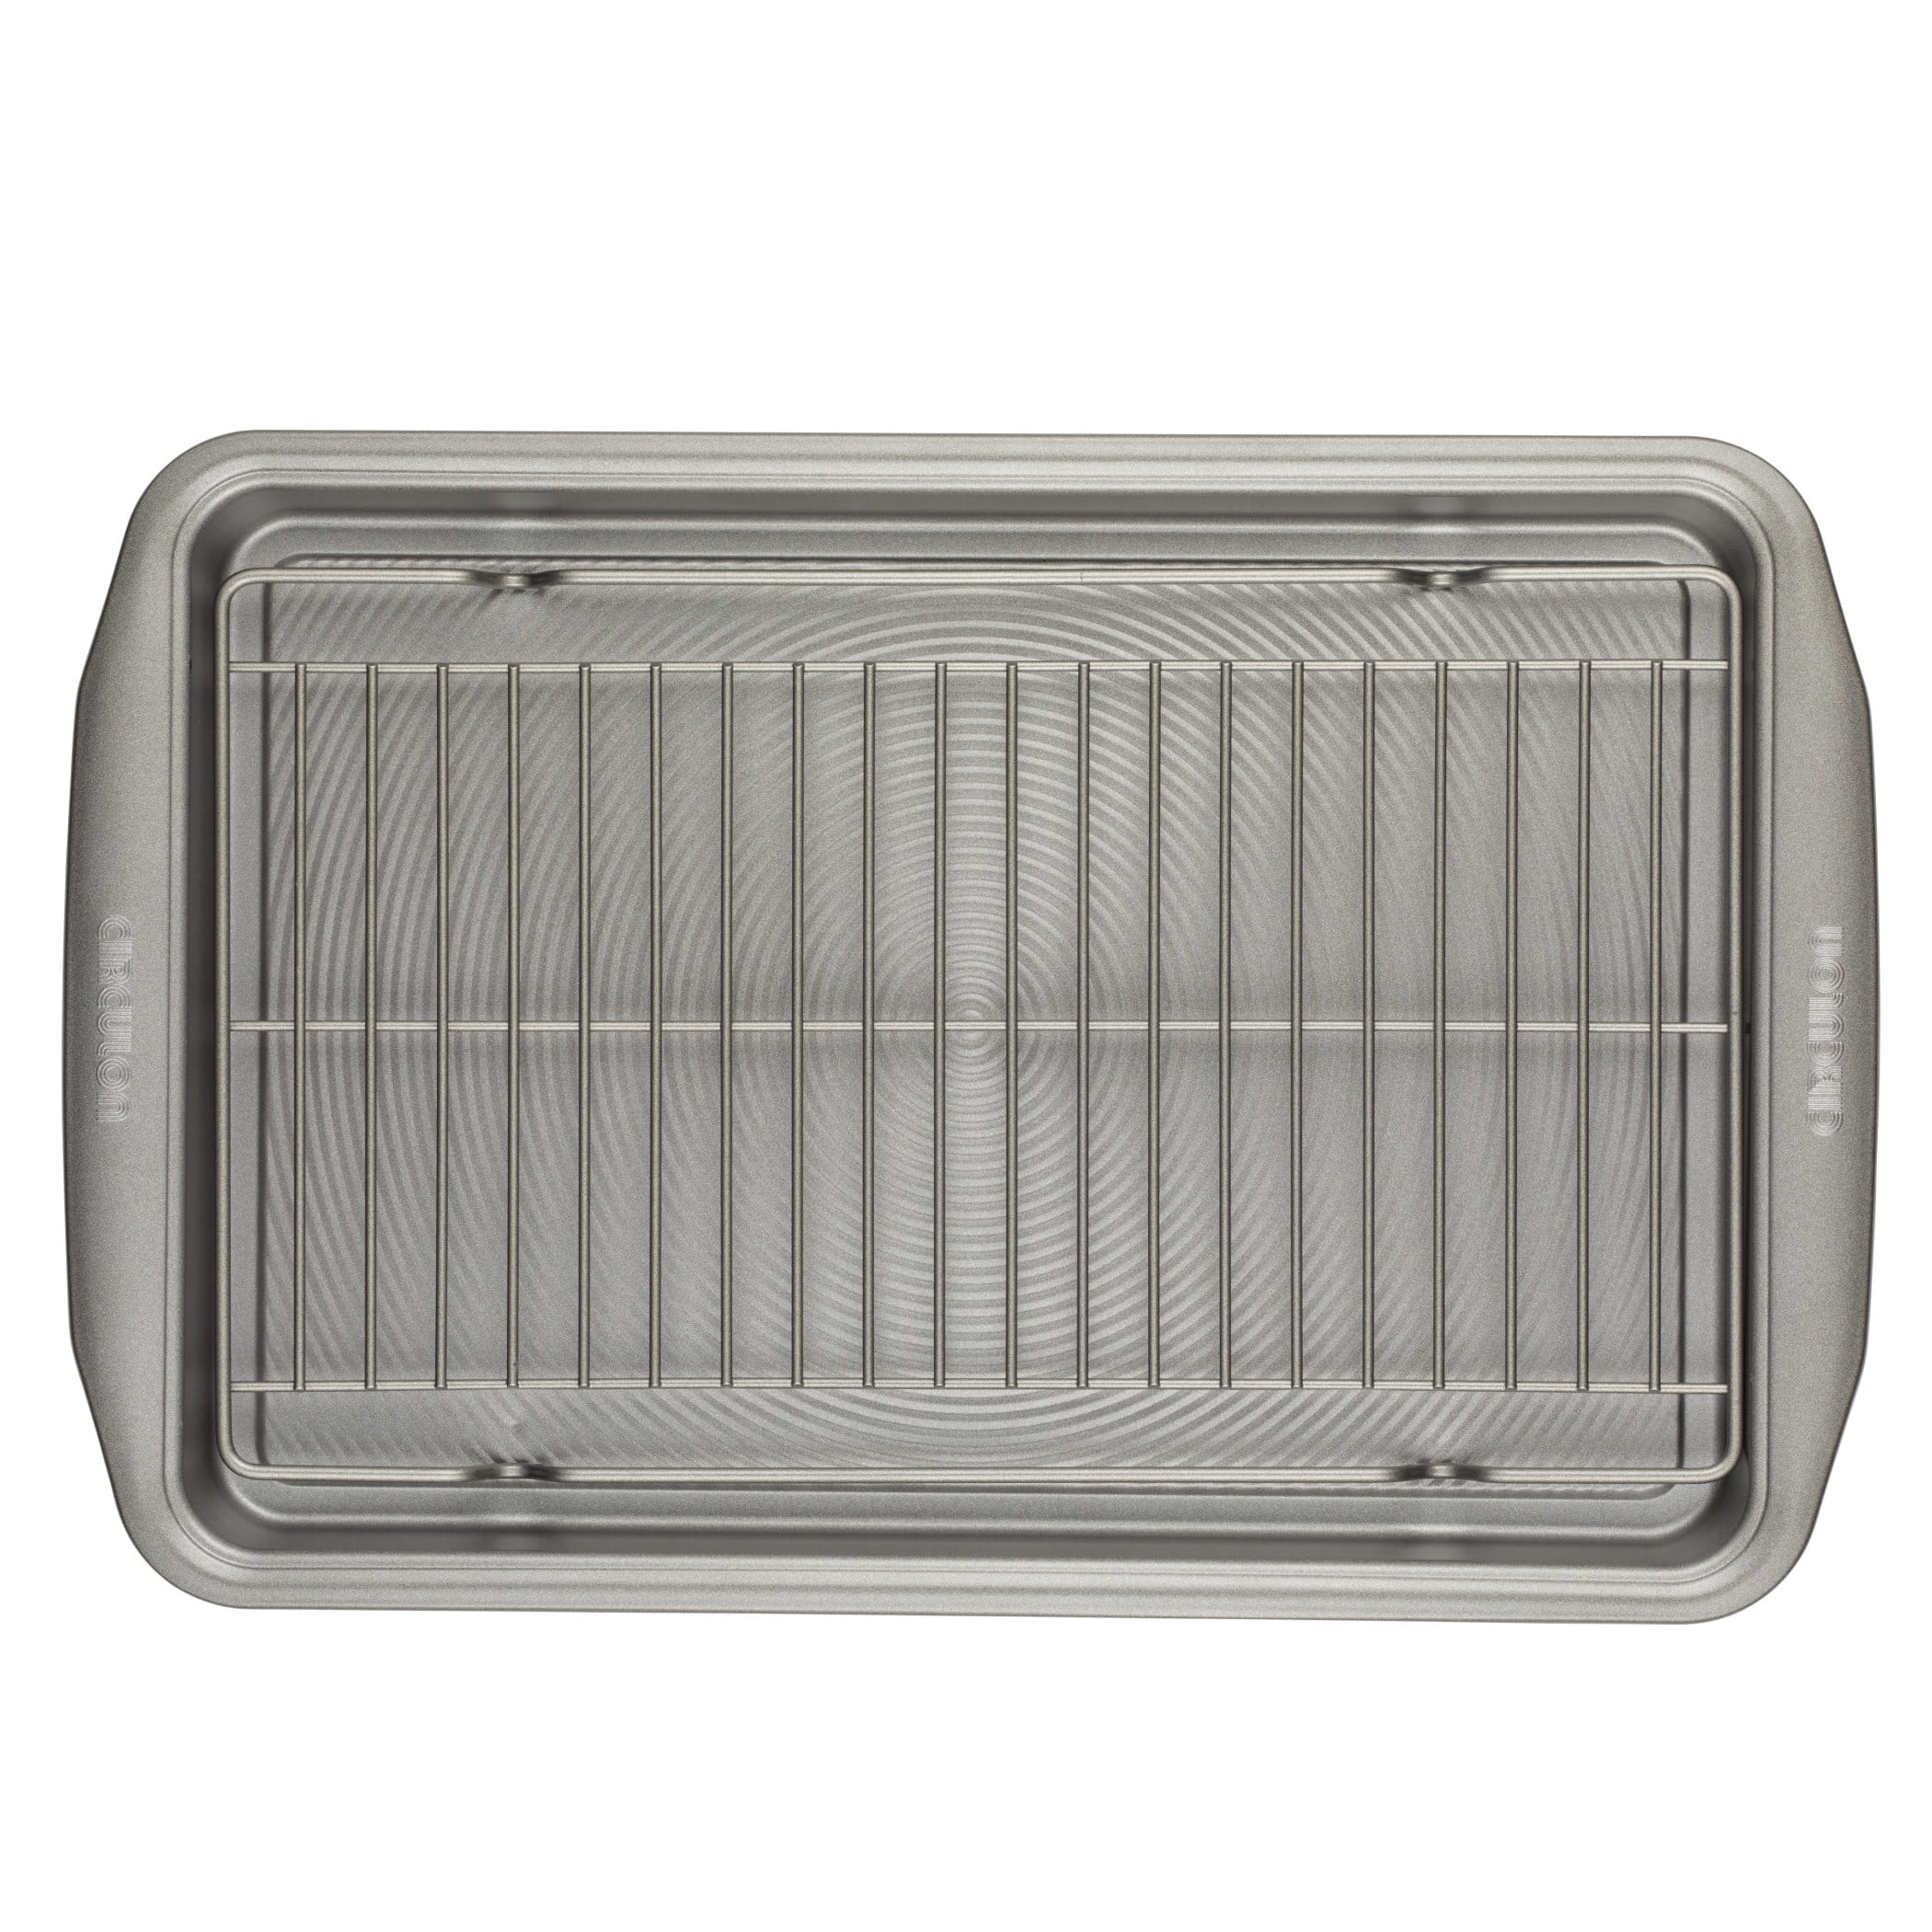 Circulon 15 x 10 Steel Nonstick Baking Sheet, BAKING PAN SET INCLUDES:  10-In x 15-In baking sheet, 2-in-1 cooling racks,Oven safe 450°F(3 Pieces)